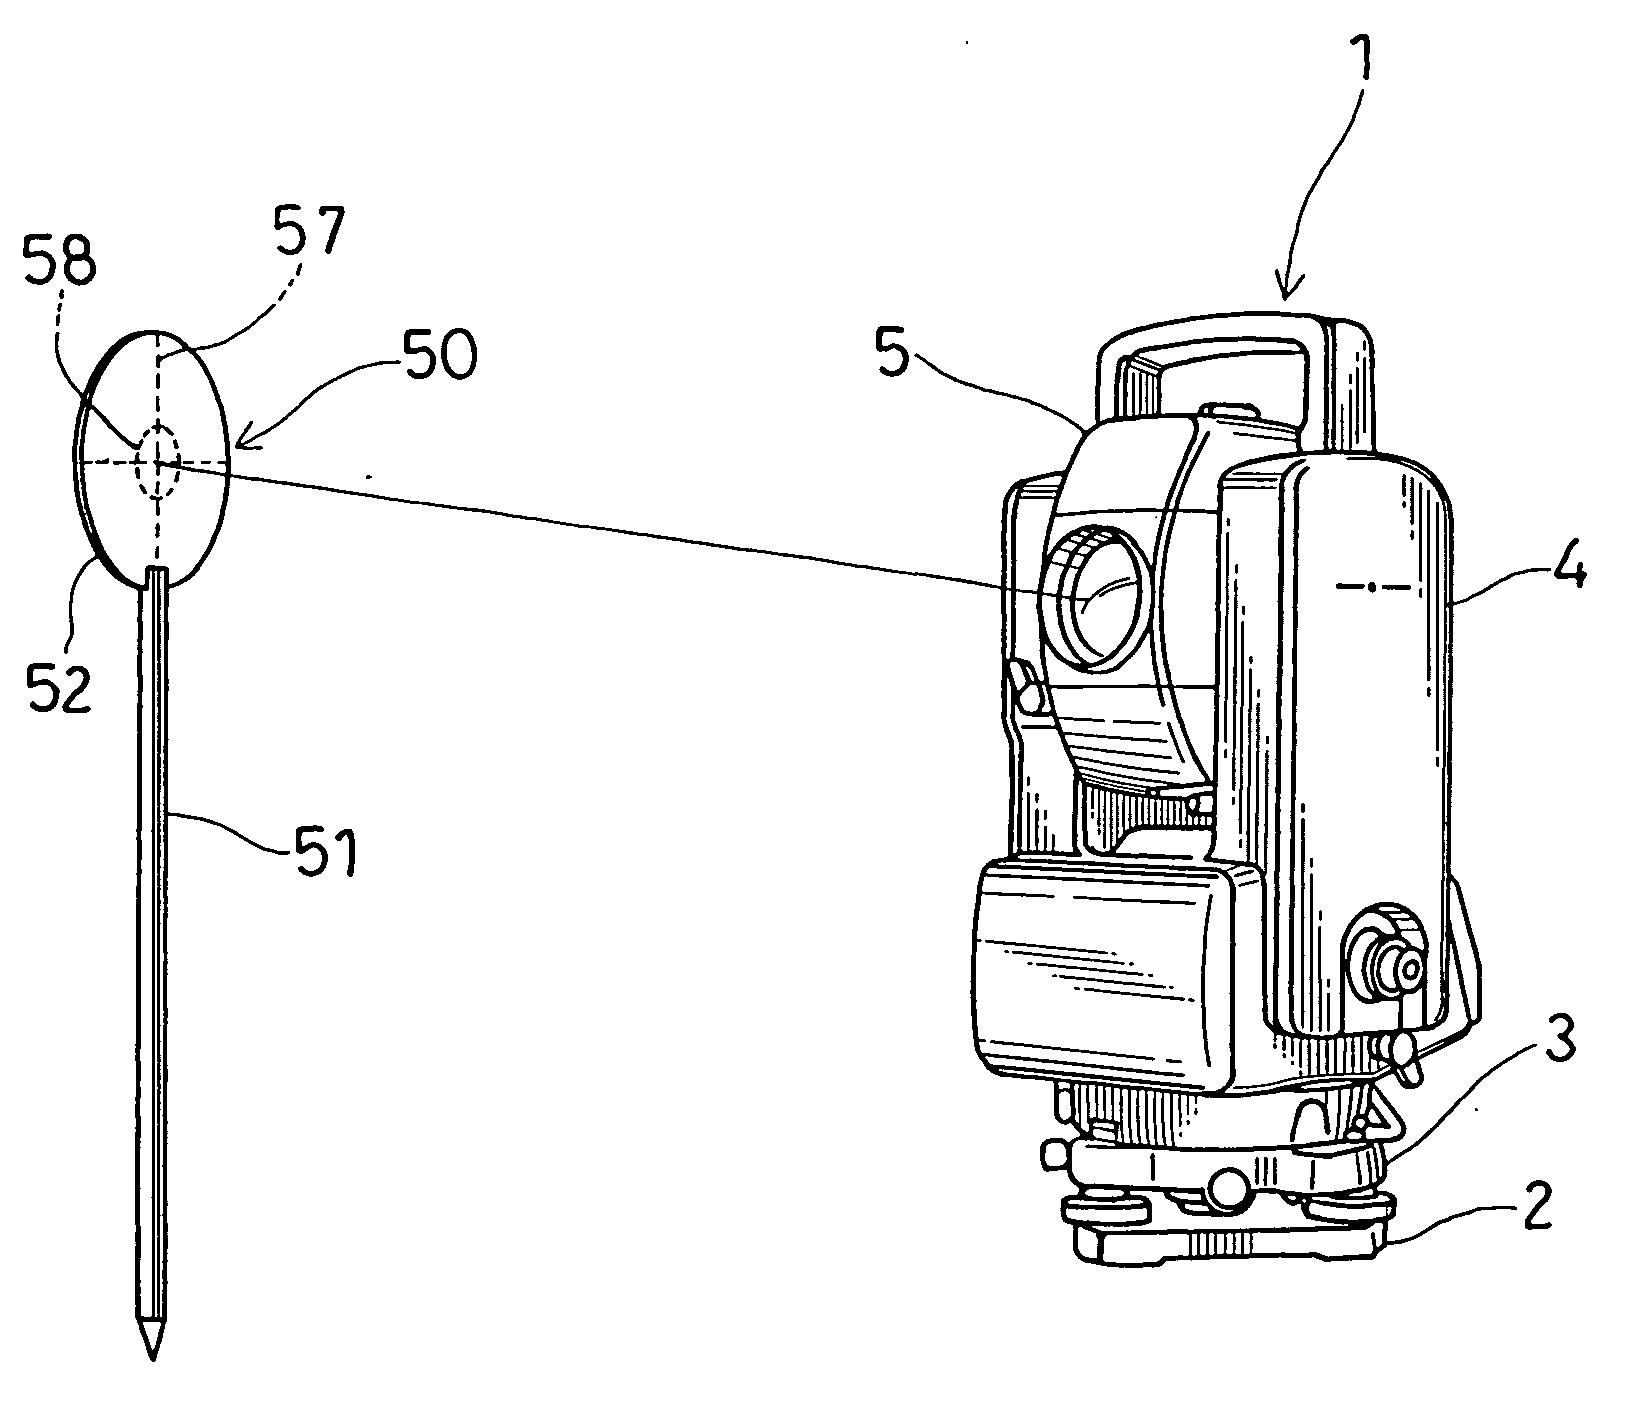 Target for surveying instrument